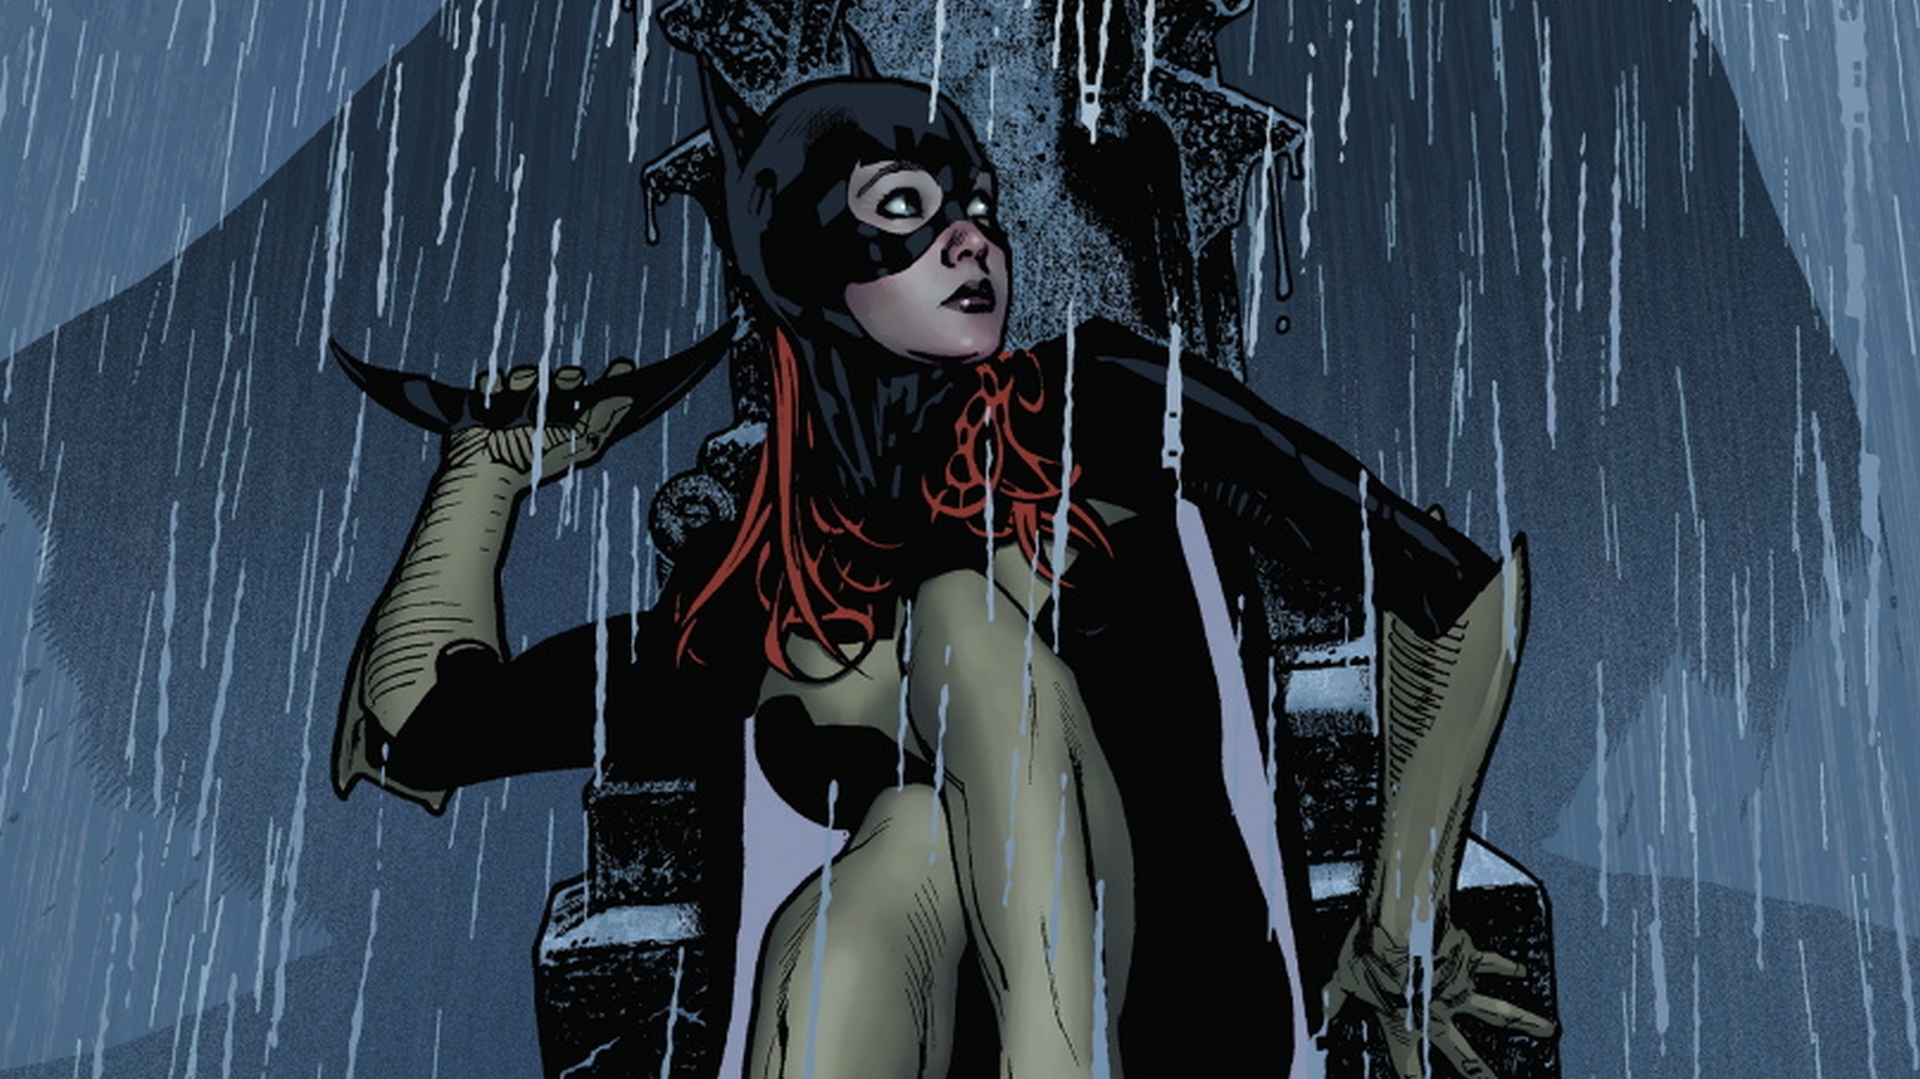 Batgirl / Oracle: A Superheroine with a Disability and Representation